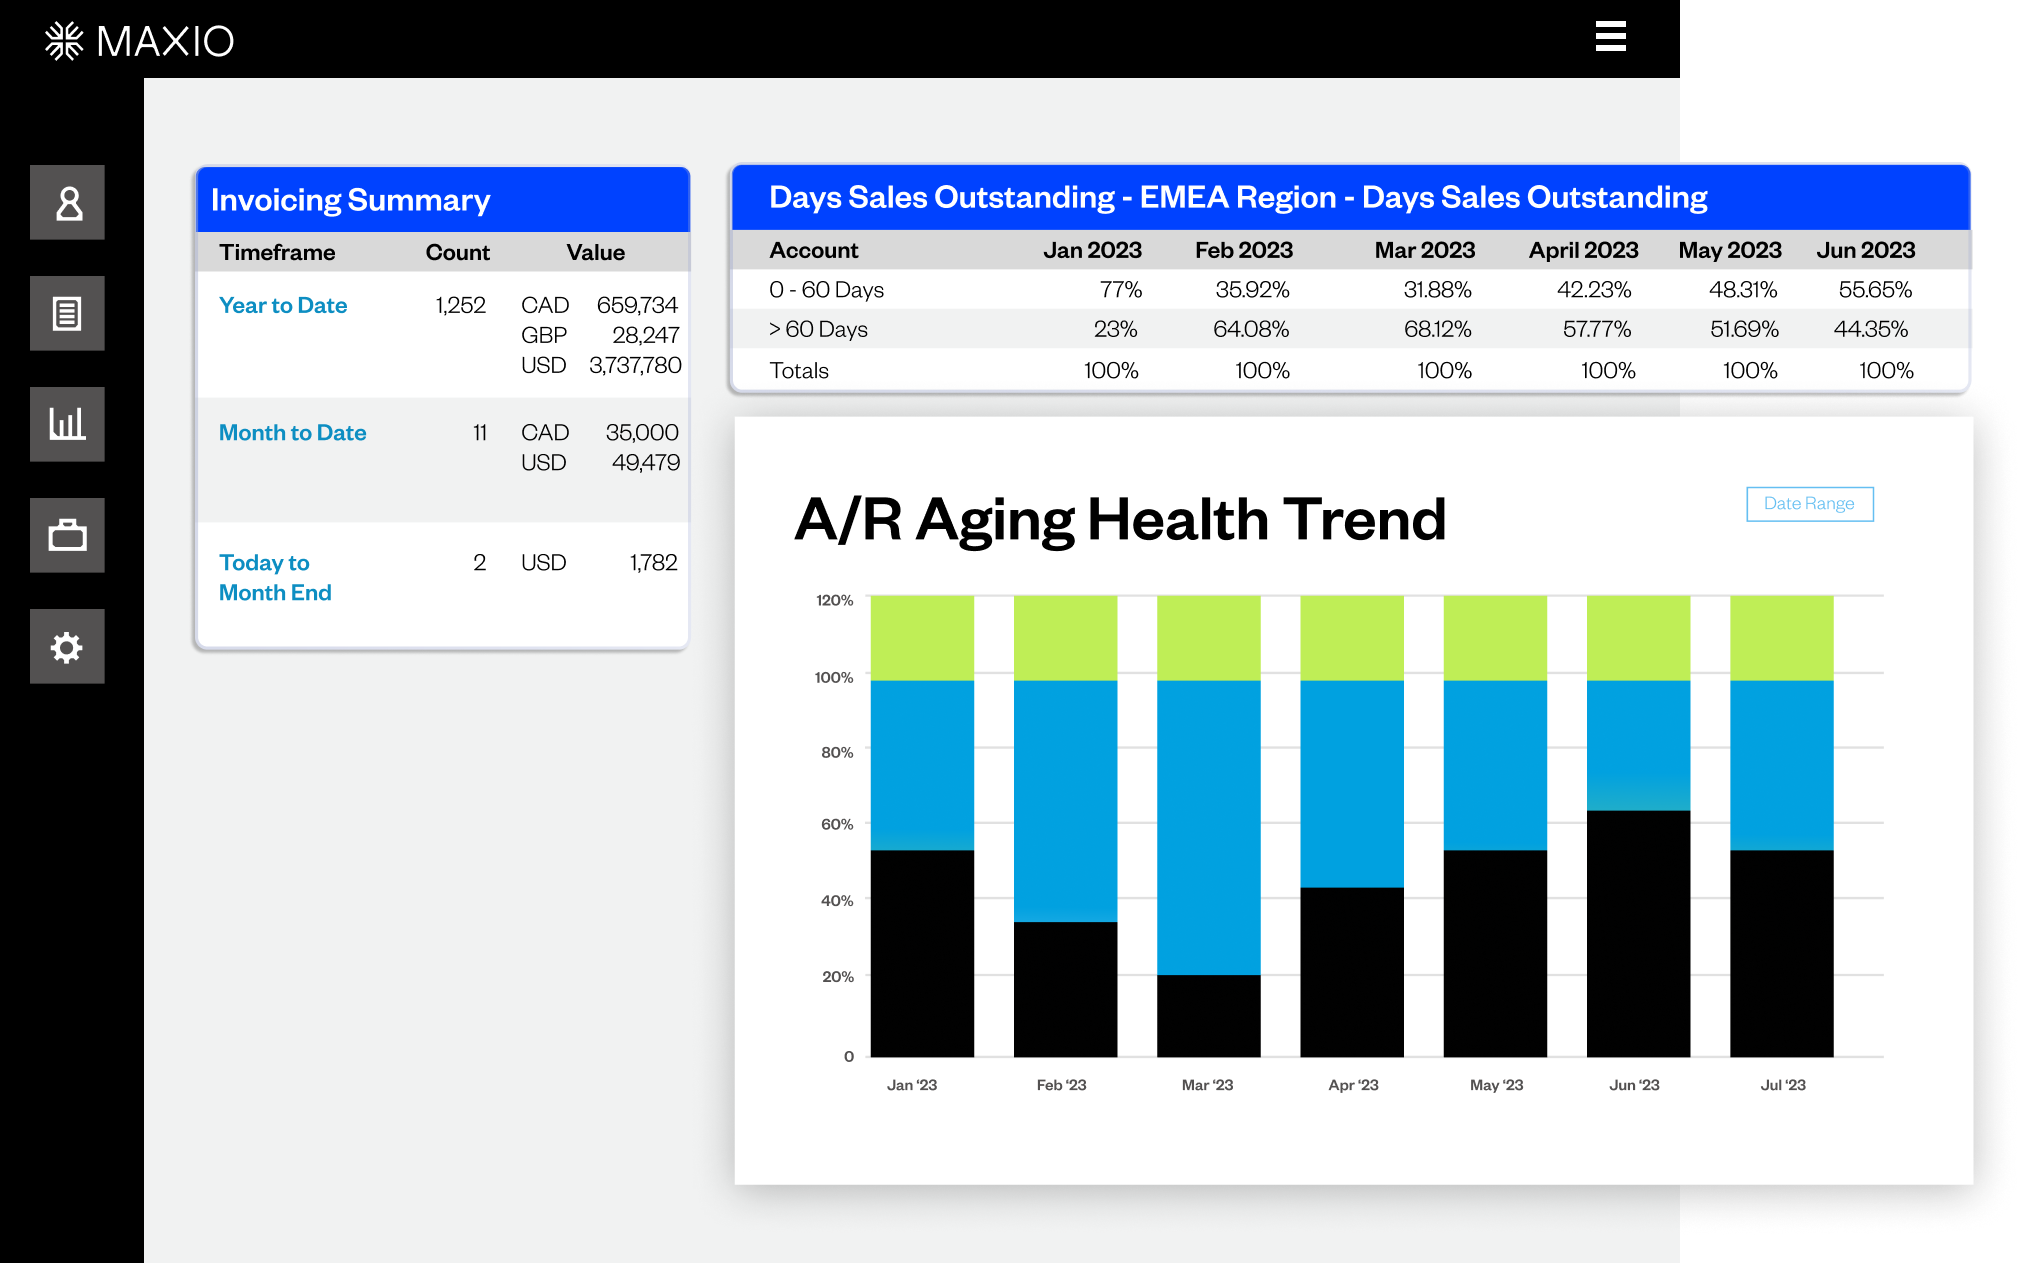 A representation of one of Maxio's custom dashboards, featuring an A/R Aging Health Trend report, Invoicing Summary, and Days Sales Outstanding for the EMEA region